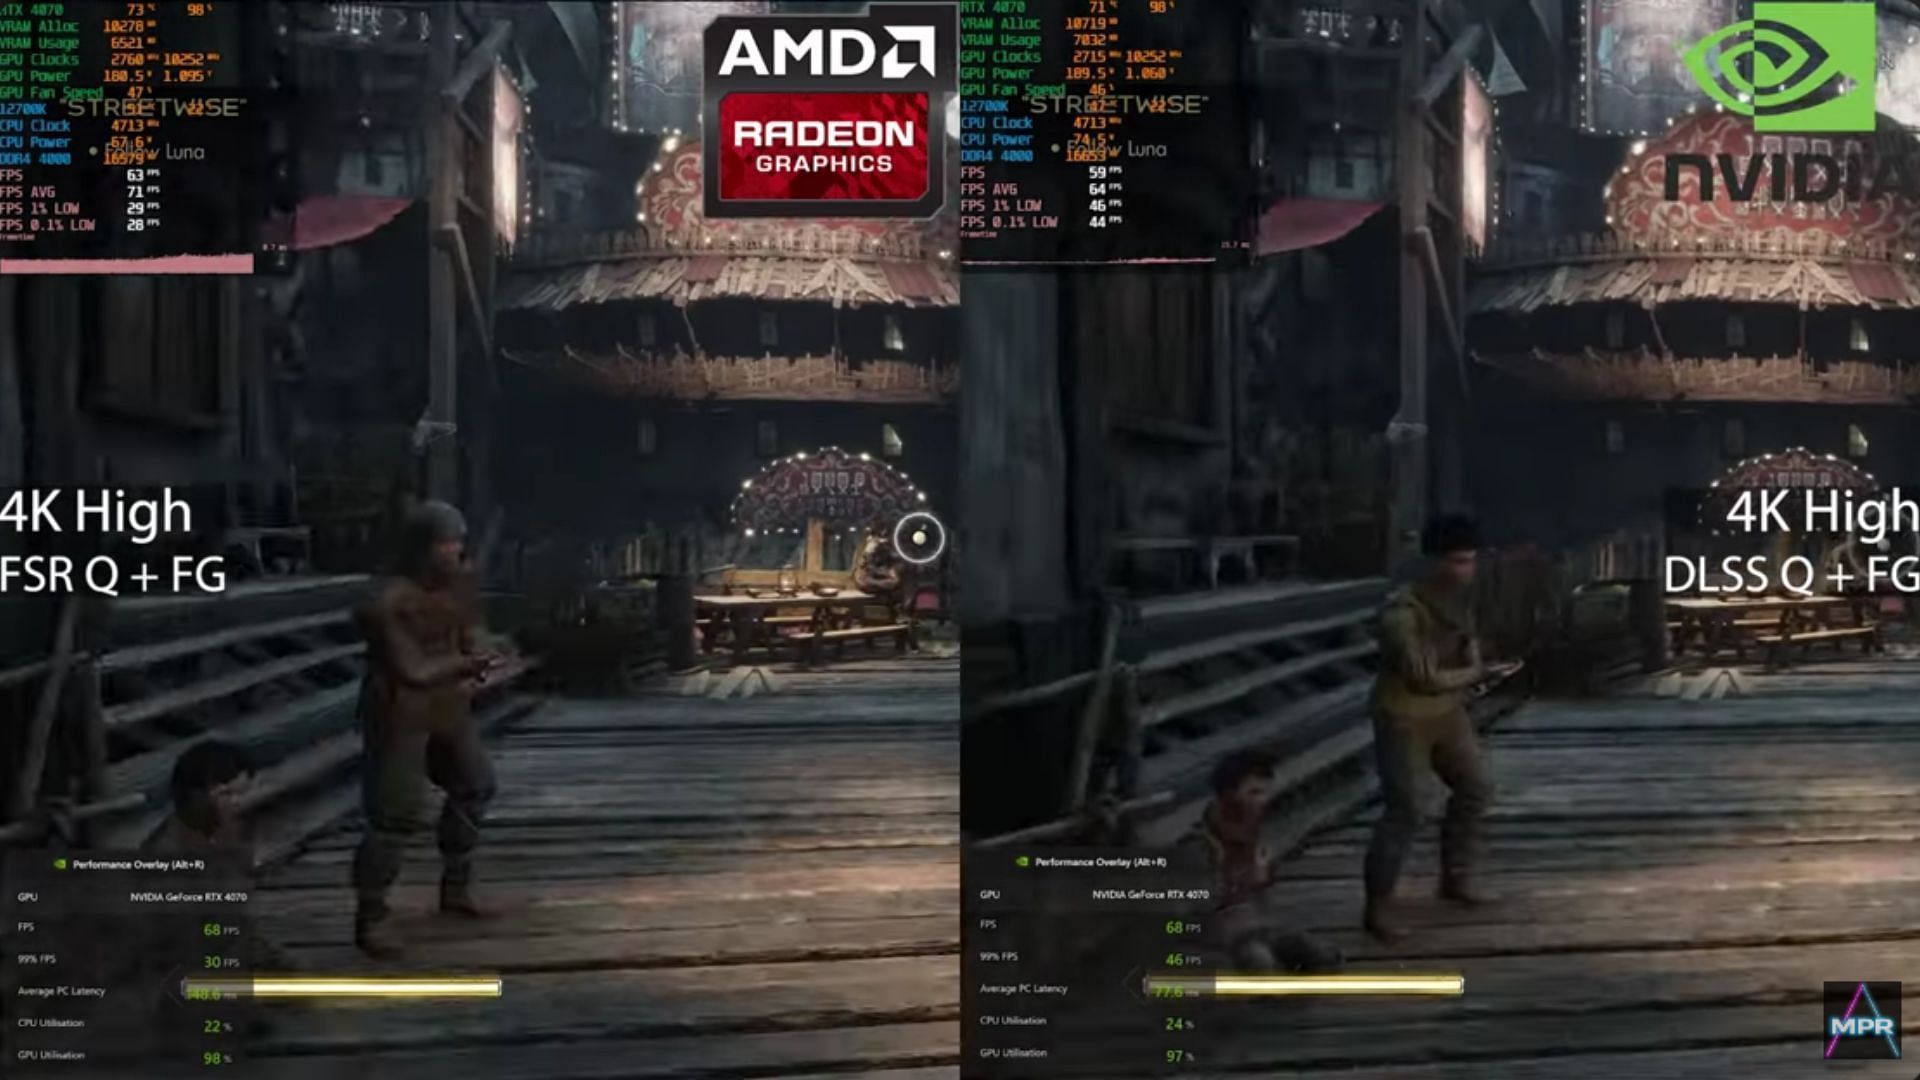 FG on the FSR produces better framerates but has lower quality compared to DLSS (Image via YouTube/ Mostly Positive Reviews)